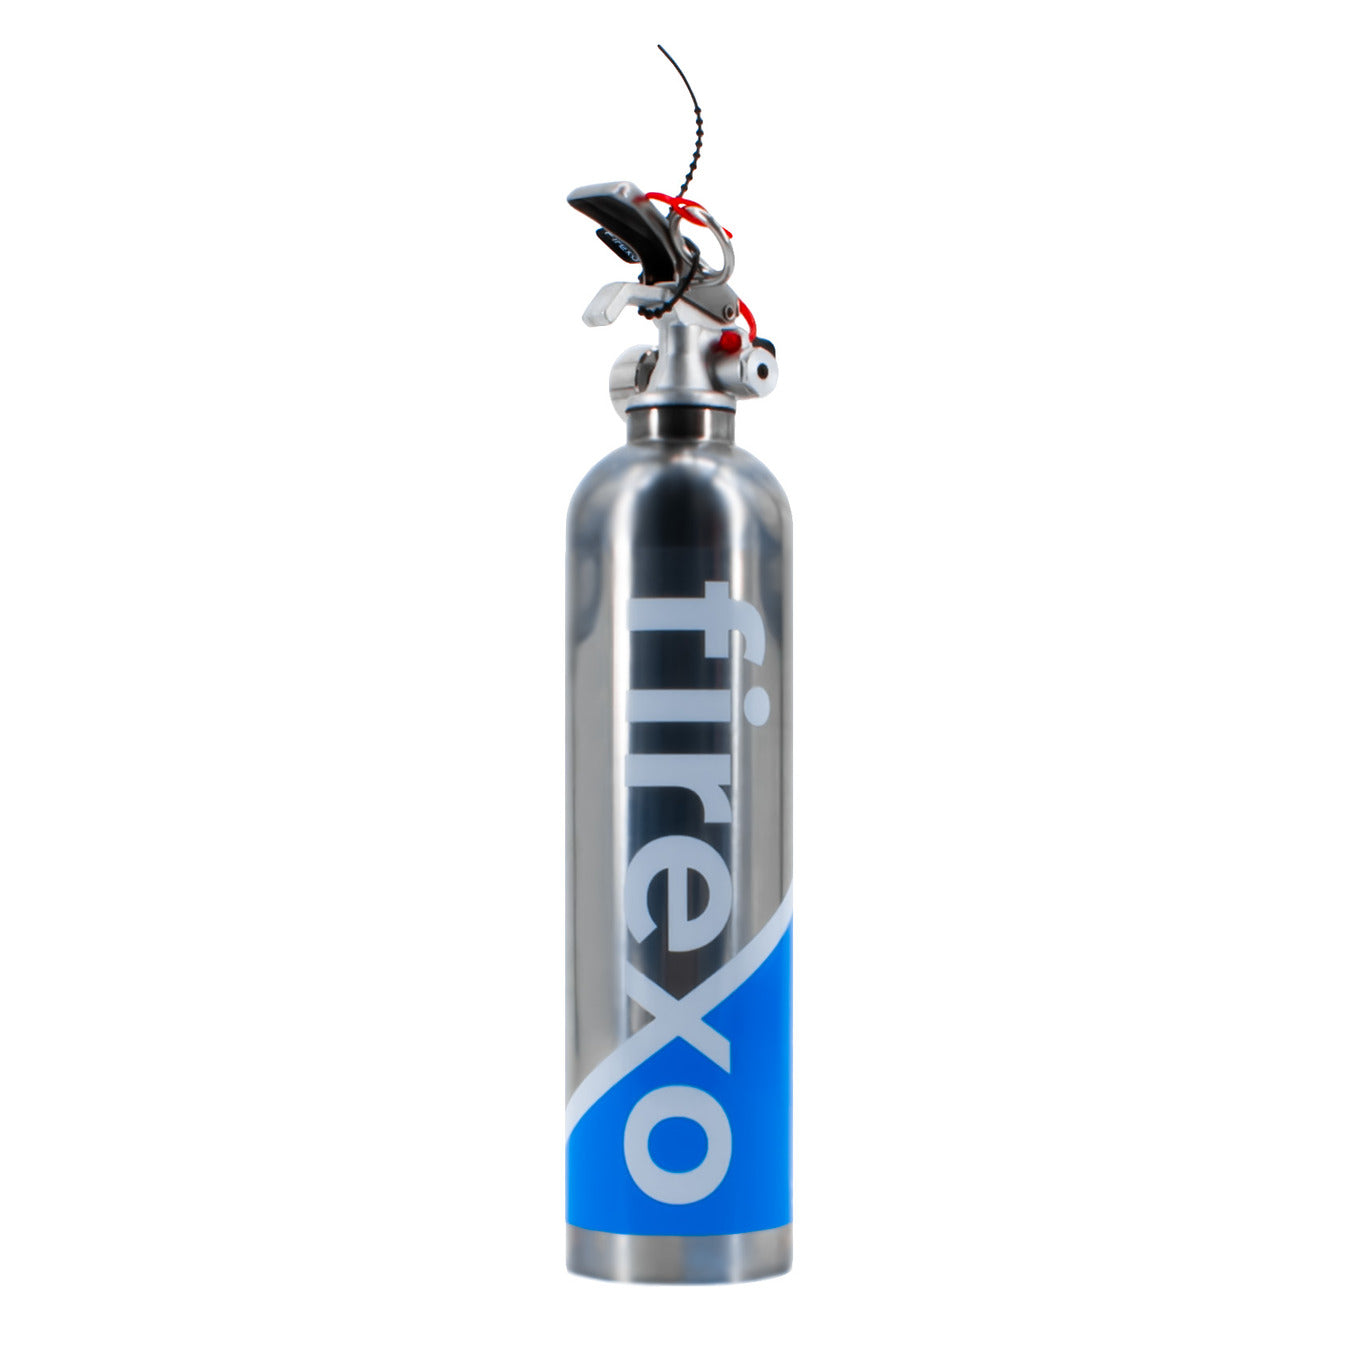 Firexo 500ml Small Fire Extinguisher in Stainless Steel